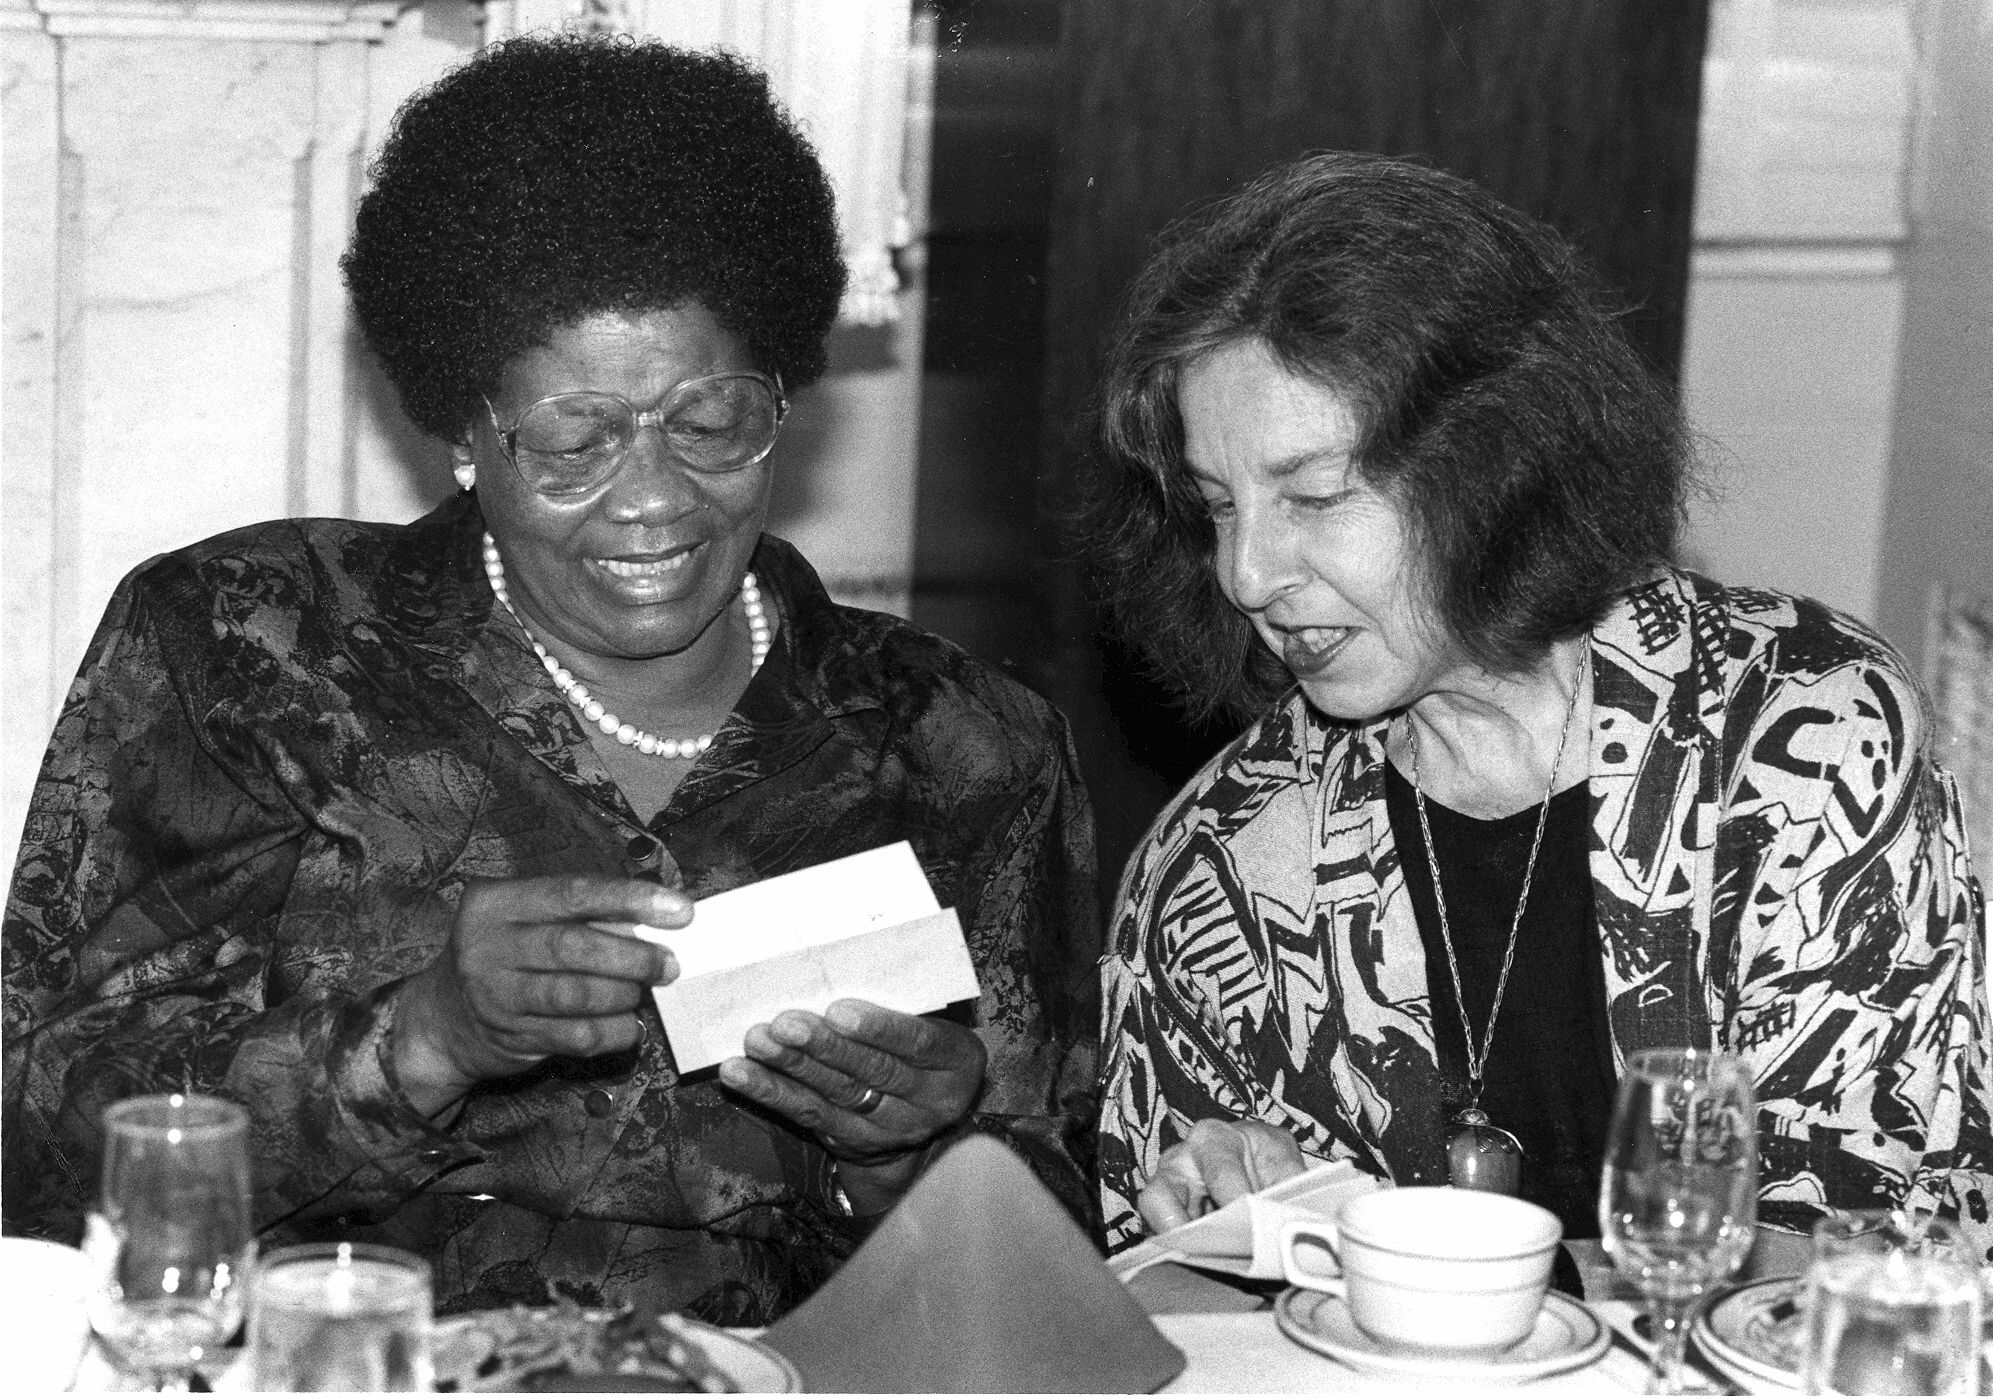 Albertina Sisulu and Jennifer Davis, Executive Director of The Africa Fund. At this time, Albertina Sisulu was a member of the Executive Committee of the African National Congress (ANC) and was active in the ANC Women&#39;s League. Albertina and Walter Sisulu, a leading member of the ANC, were brought to the United States by The Africa Fund to participate in a celebration of the Fund&#39;s 25th anniversary in New York City. The following day, Albertina Sisulu and Davis went to Washington, D.C., where this photo was taken.